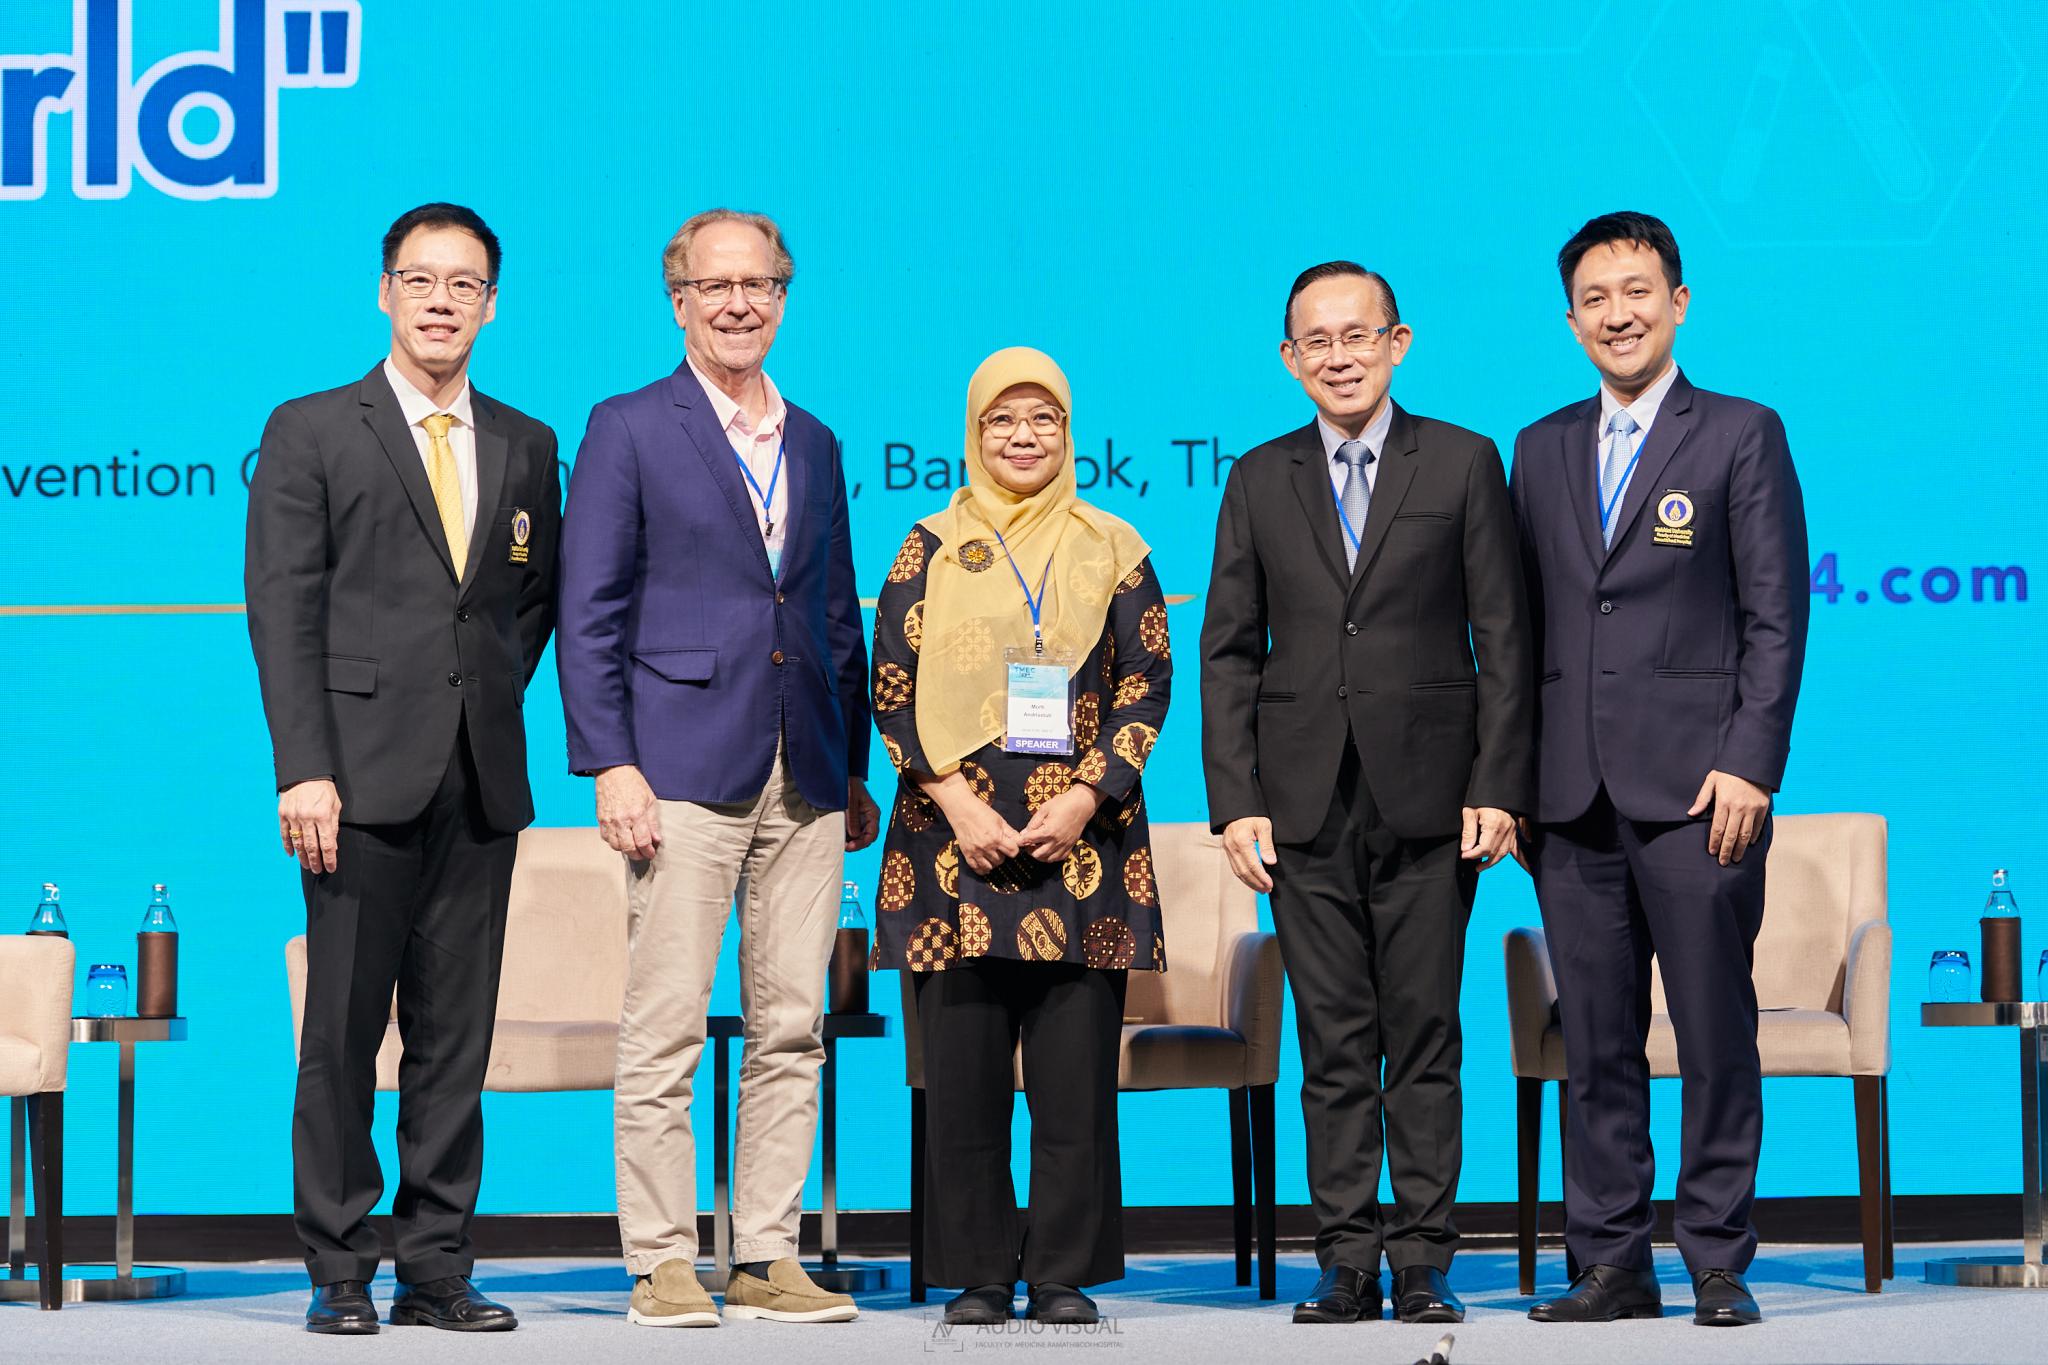 The 23rd Thai Medical Education Conference 2024